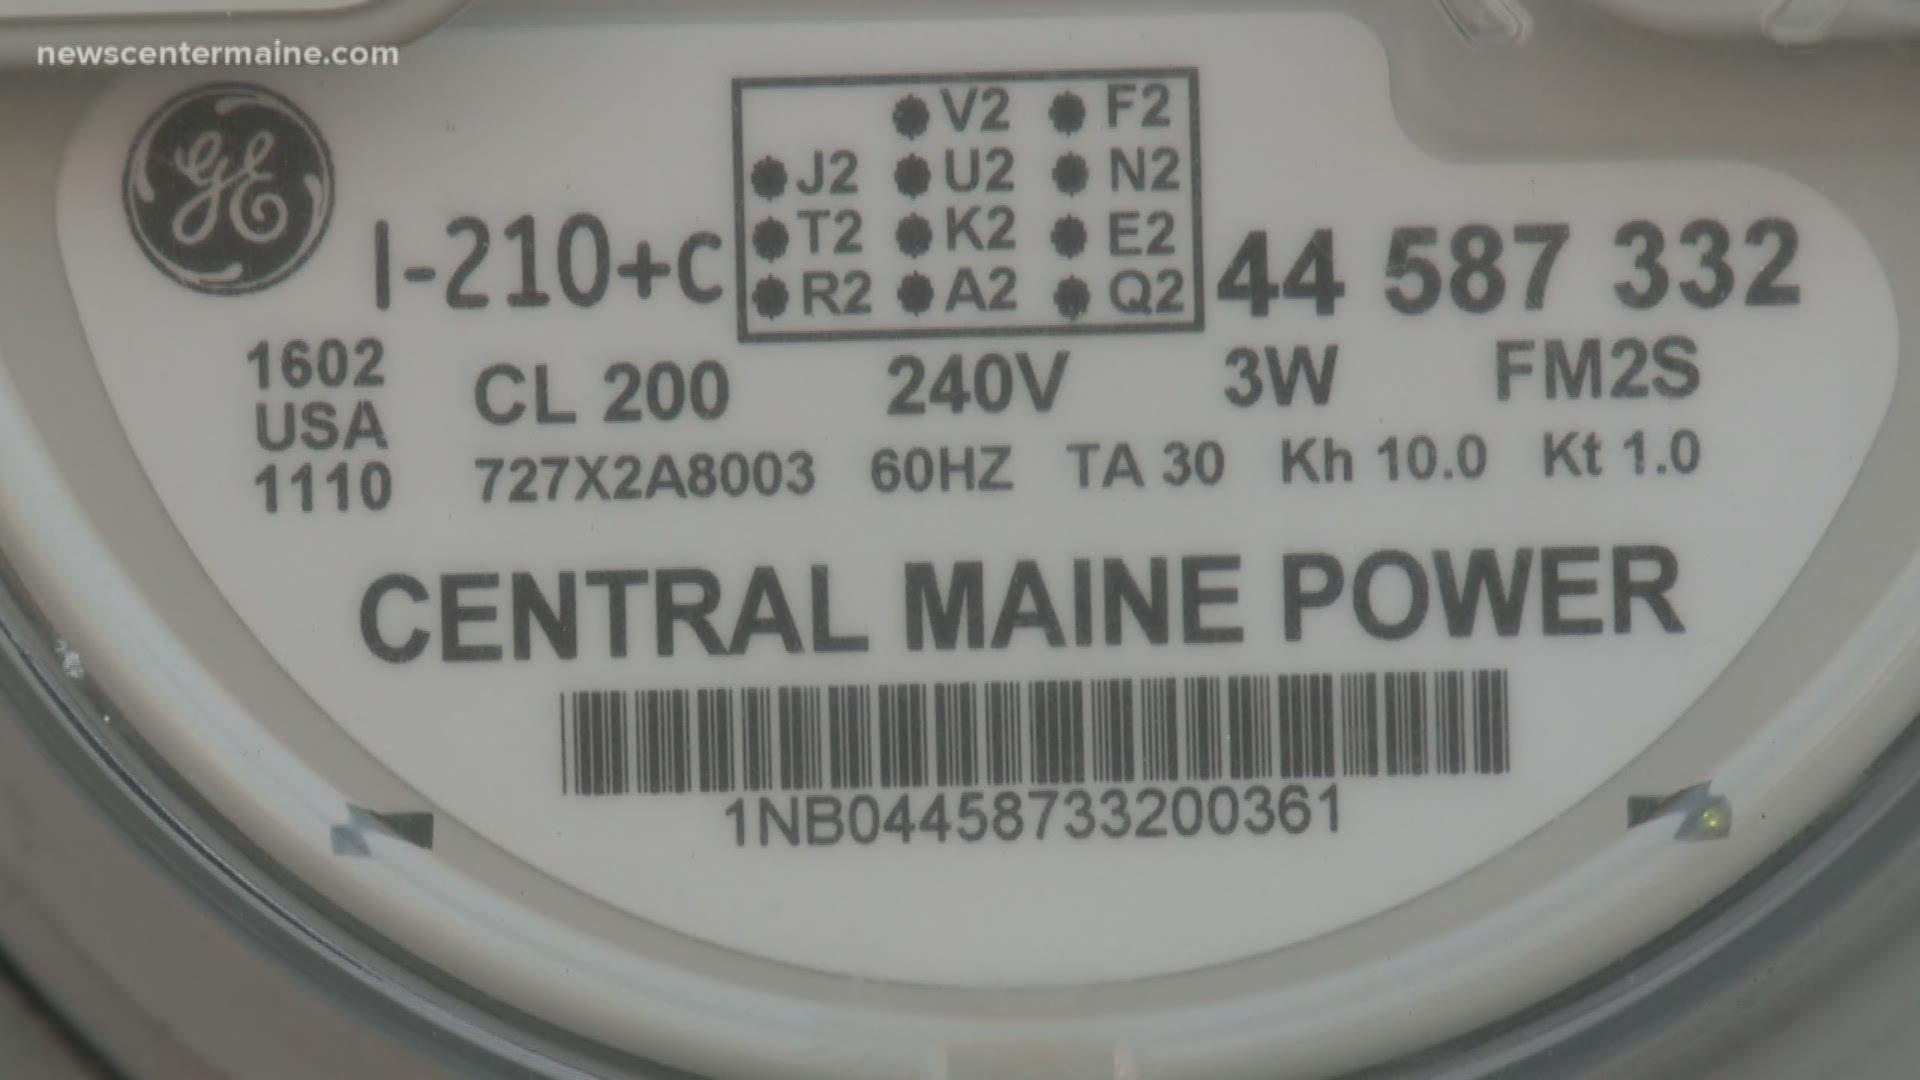 Complaints for Central Maine Power have not diminished as the company asks for $46 million annual rate hike.